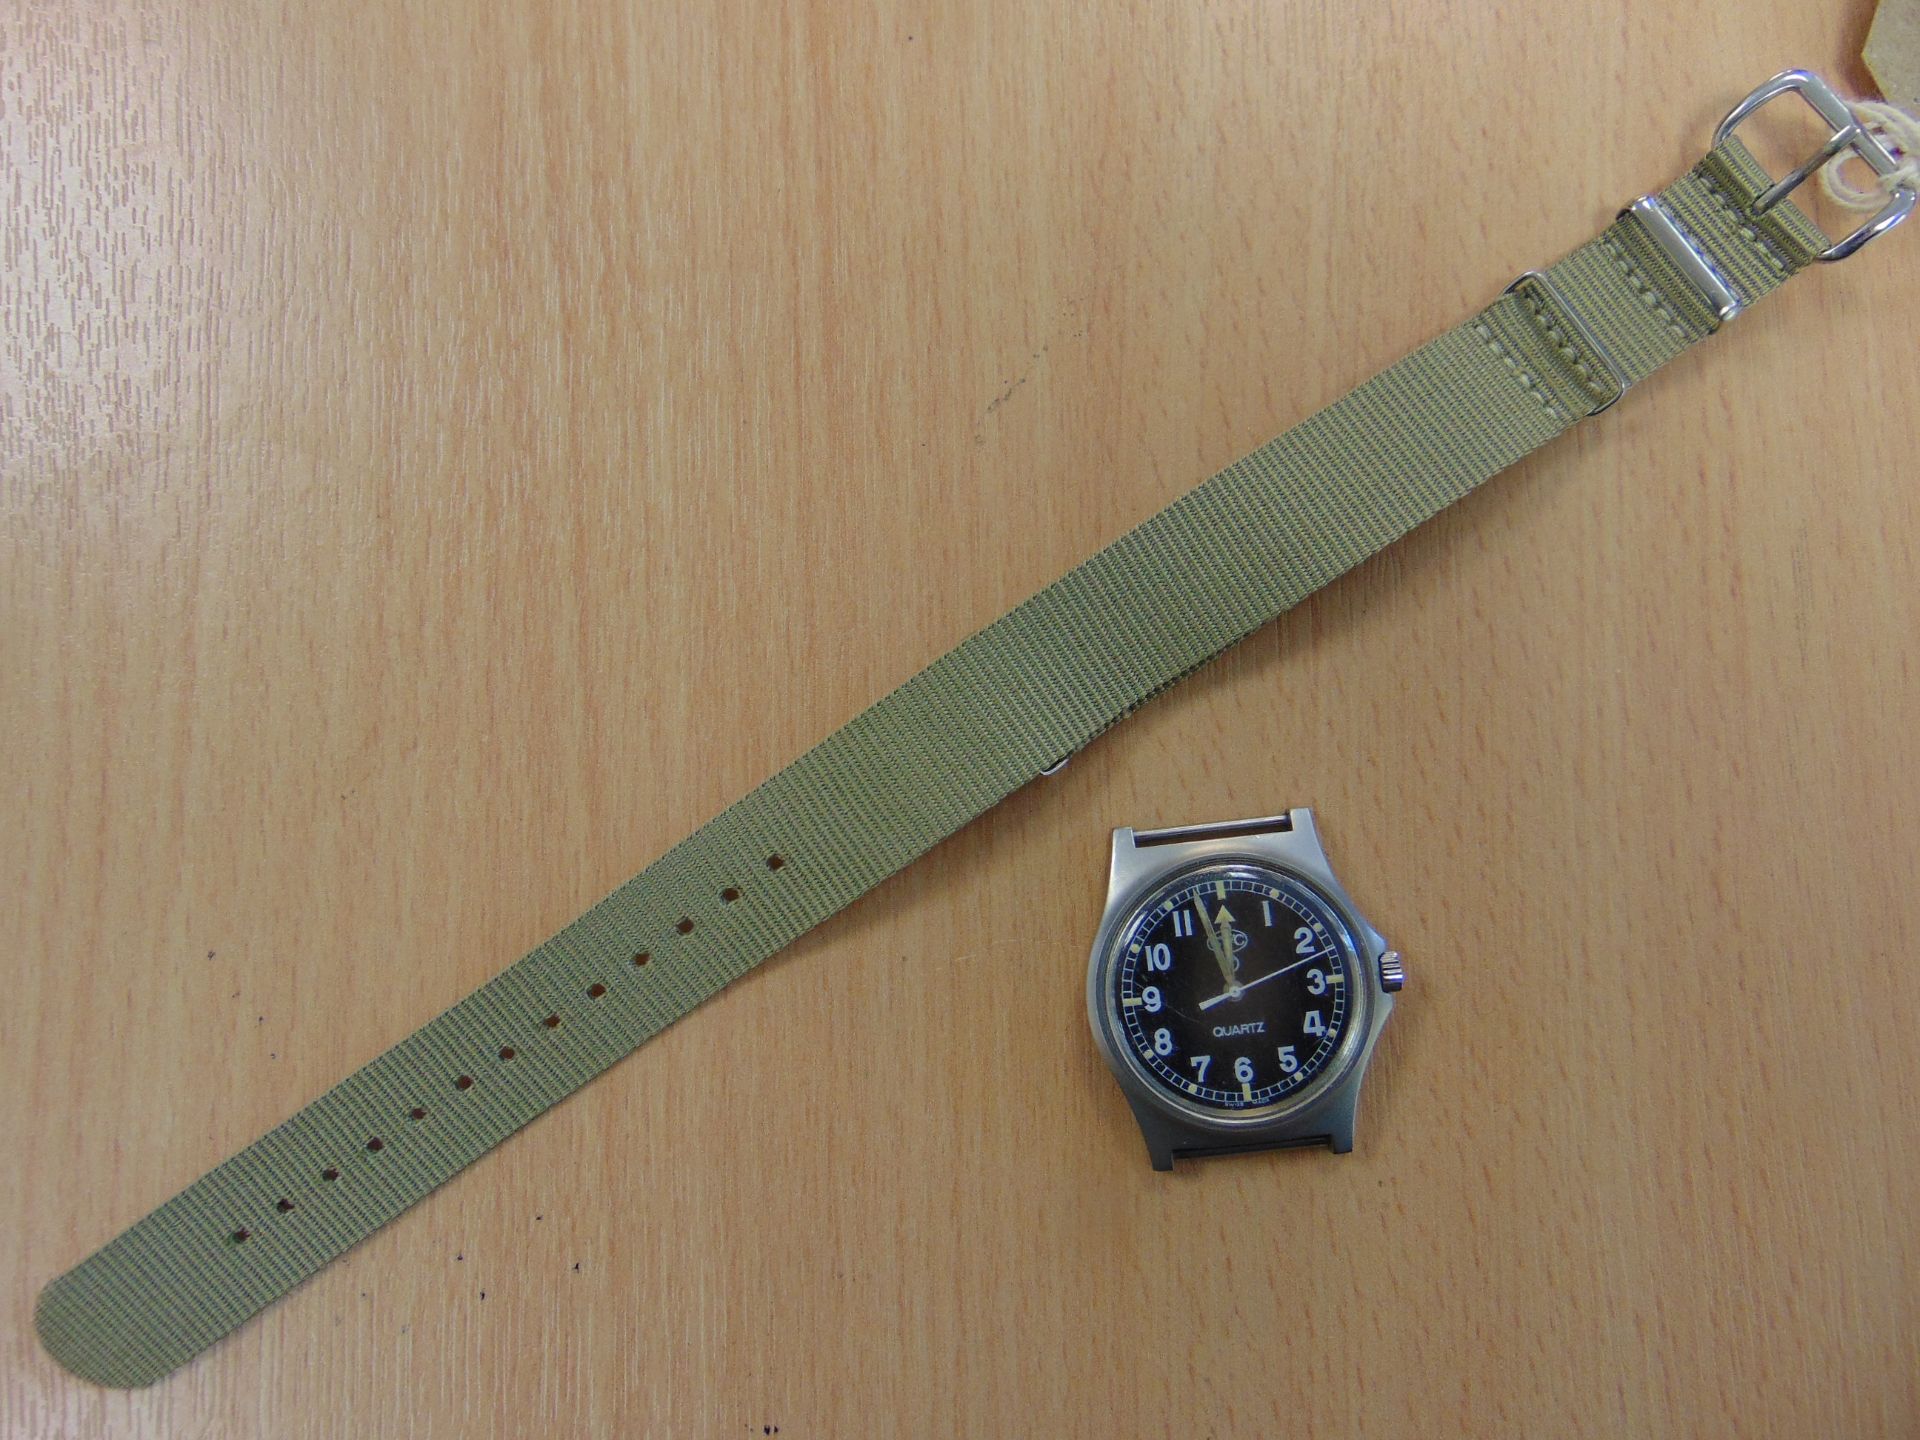 VERY NICE CWC W10 SERVICE WATCH WATER PROOF TO 5 ATM NATO MARKED DATED 2006 - Image 11 of 12